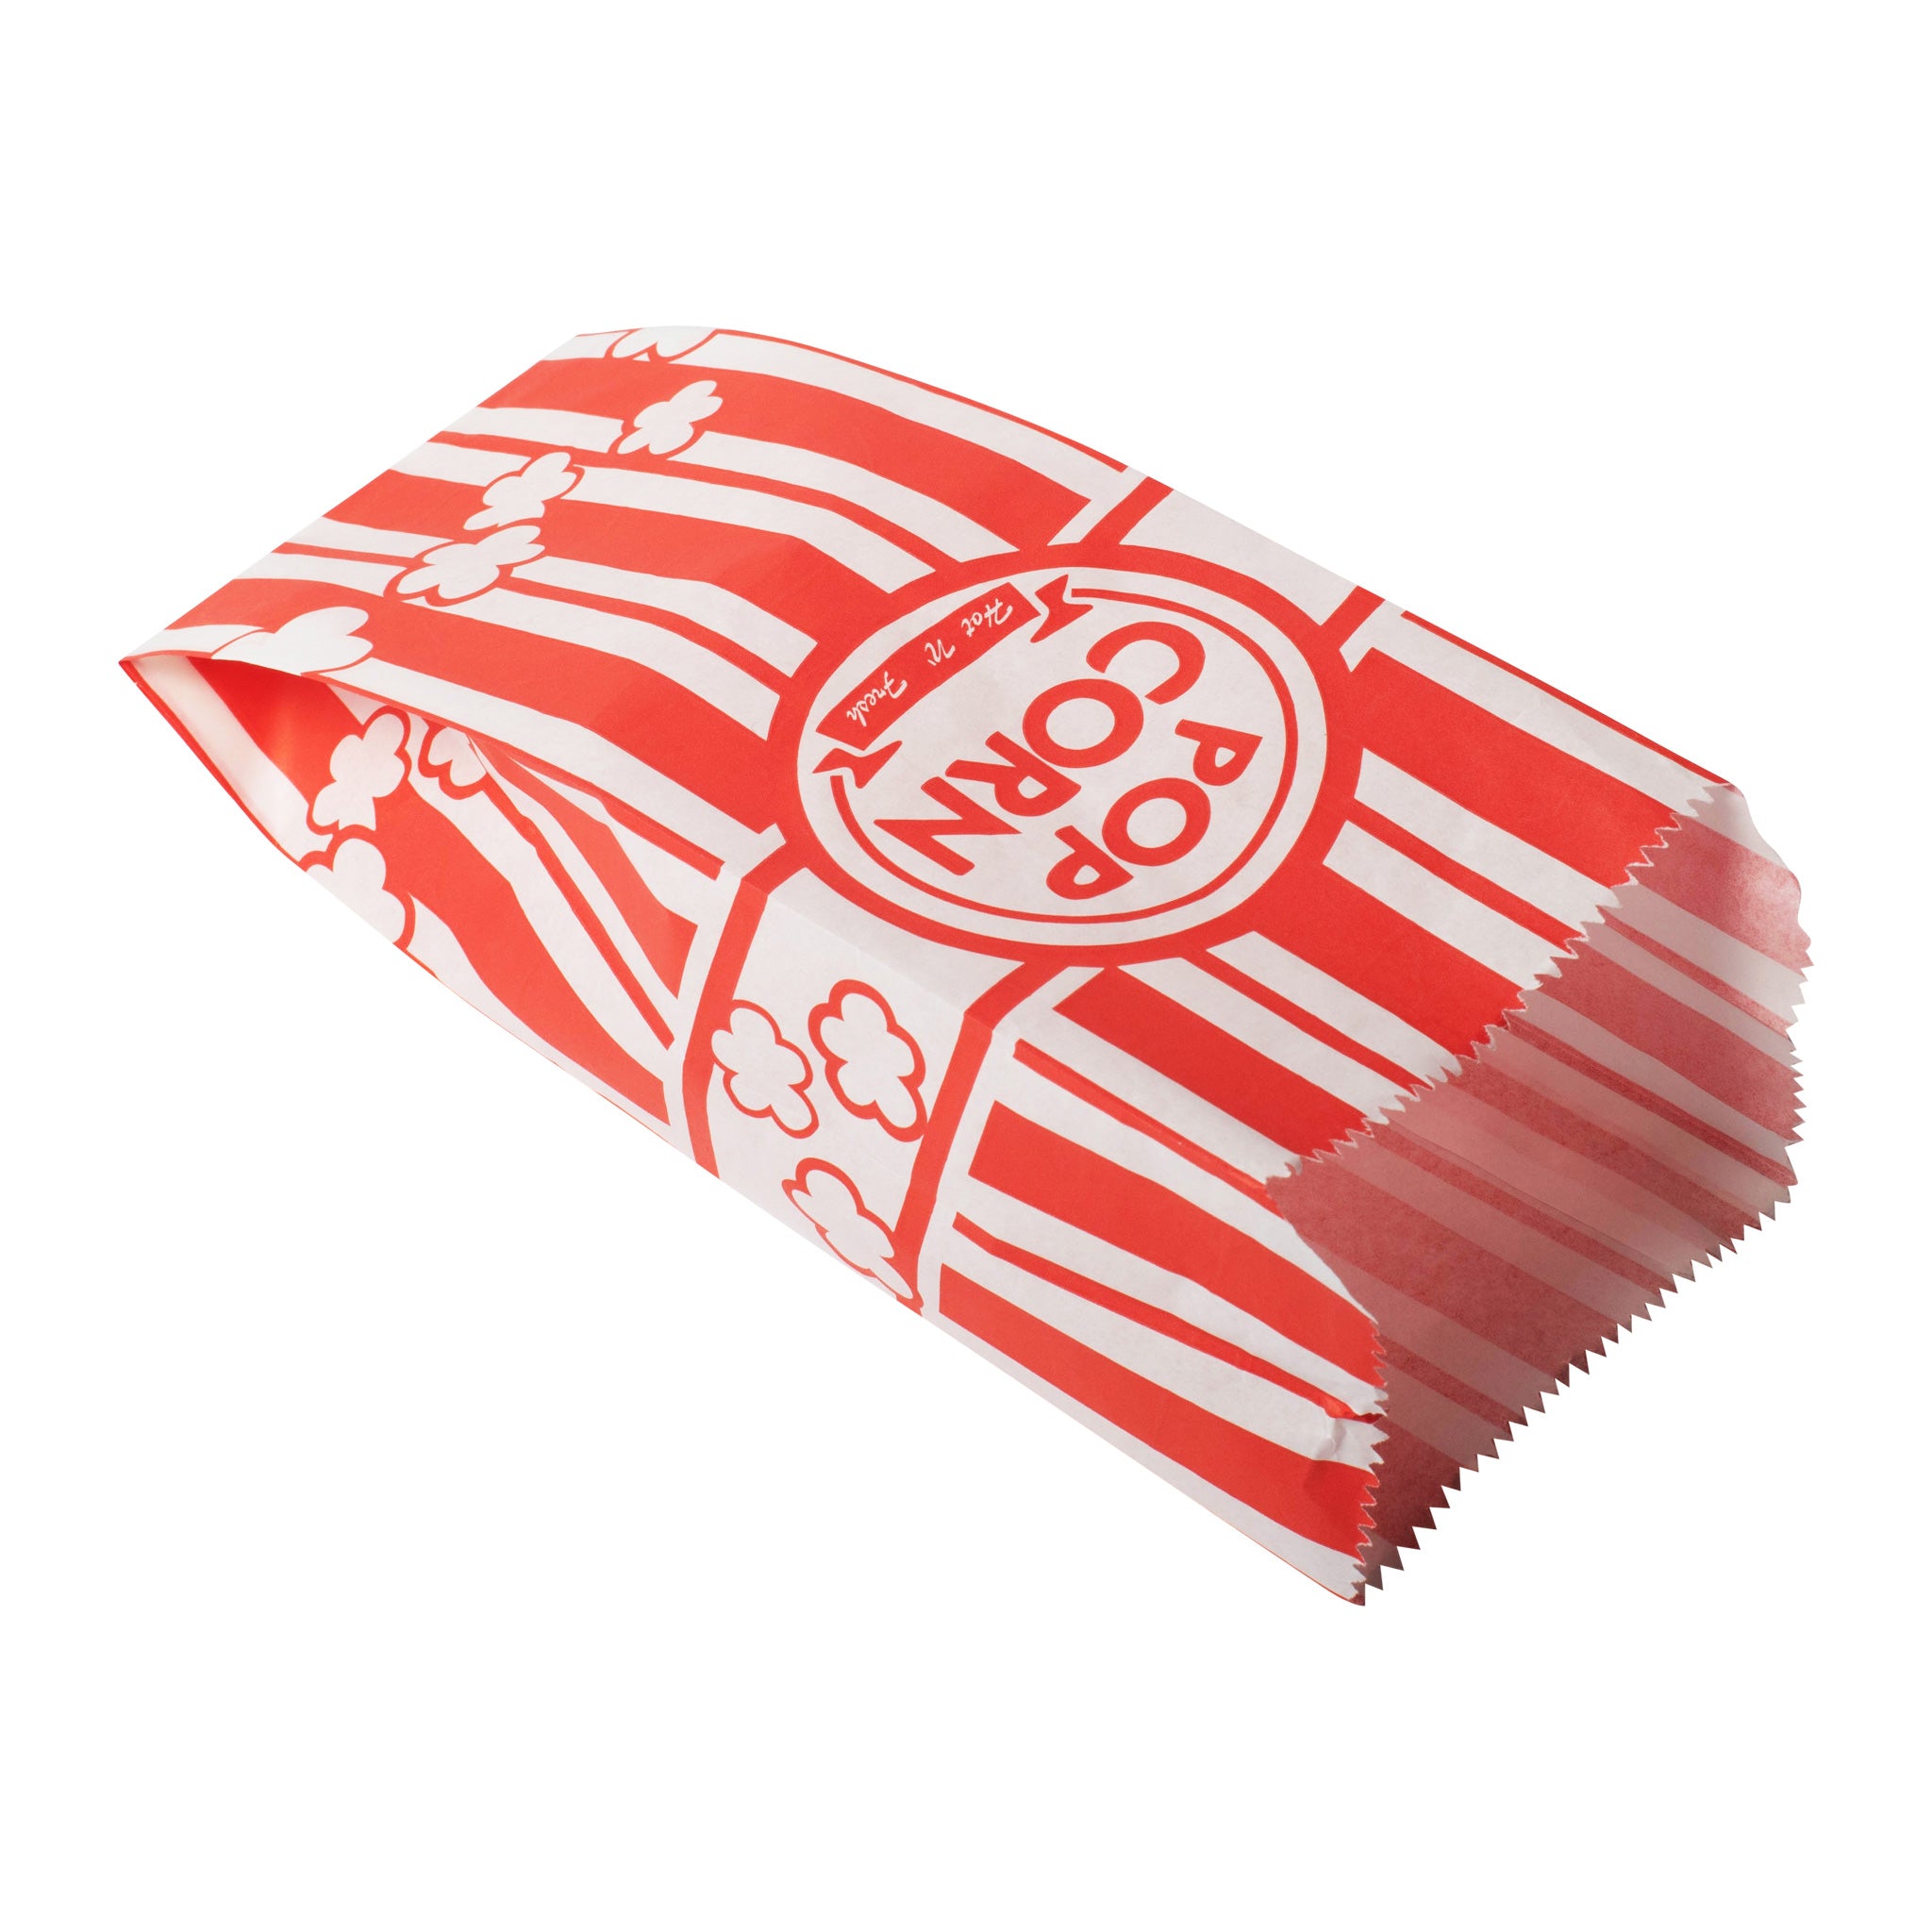 Medium Popcorn Paper Party Bags (Pack of 1000)